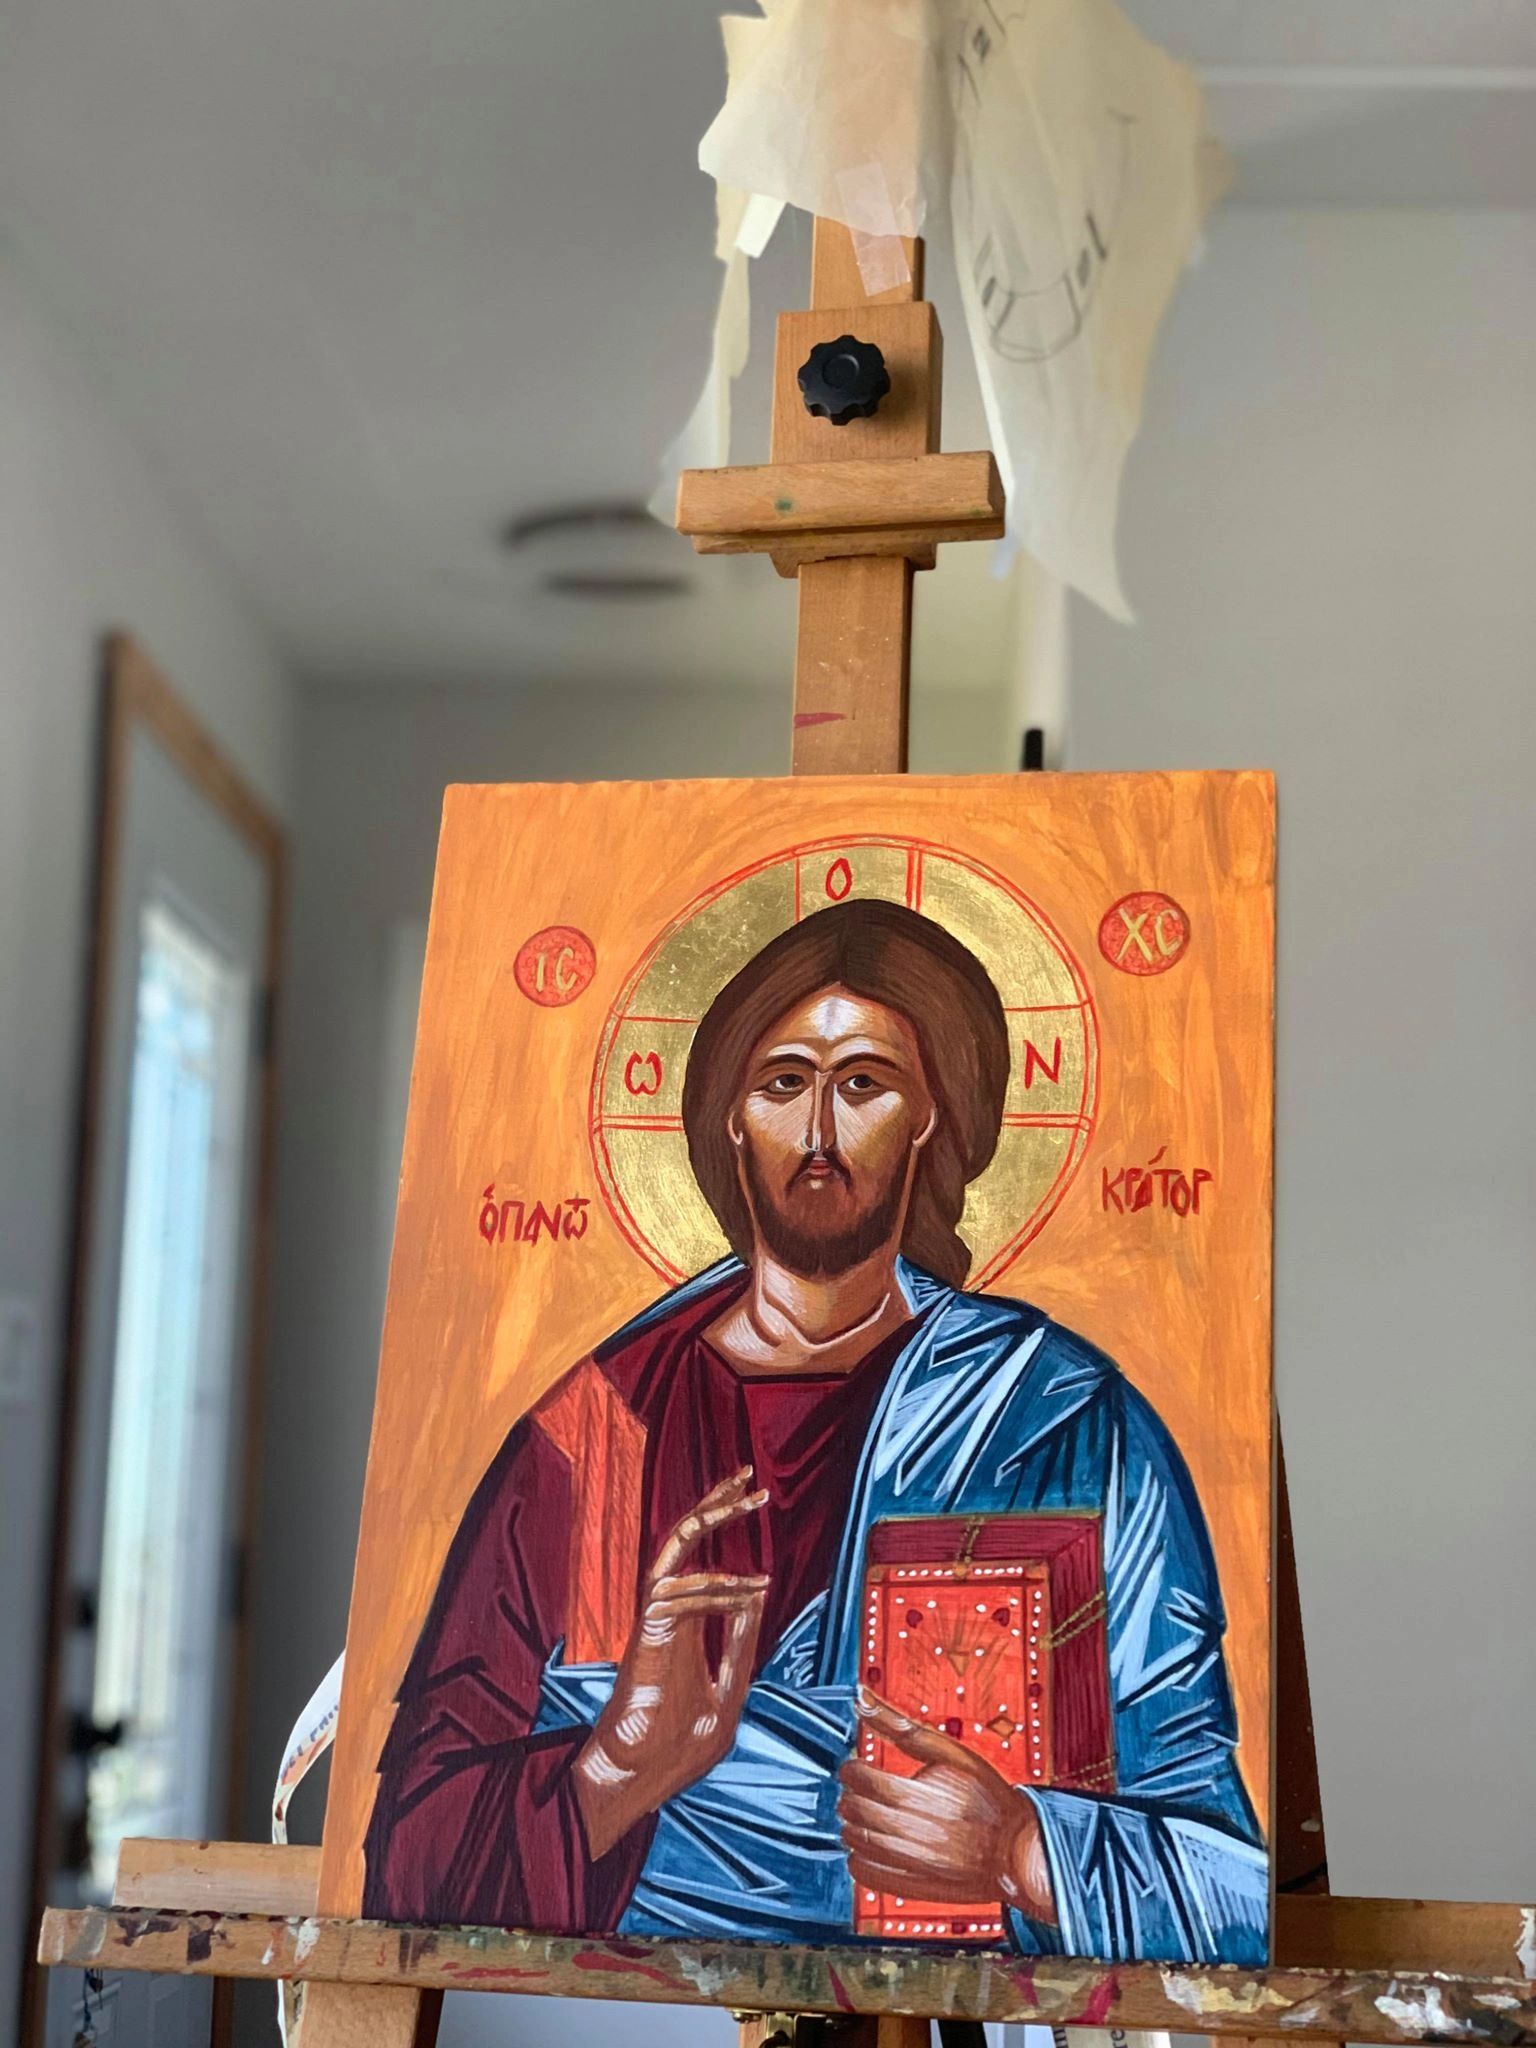 Christ Pantocrator (Χριστὸς Παντοκράτωρ) is a specific depiction of Christ.
Acrylic on Wood Panel.